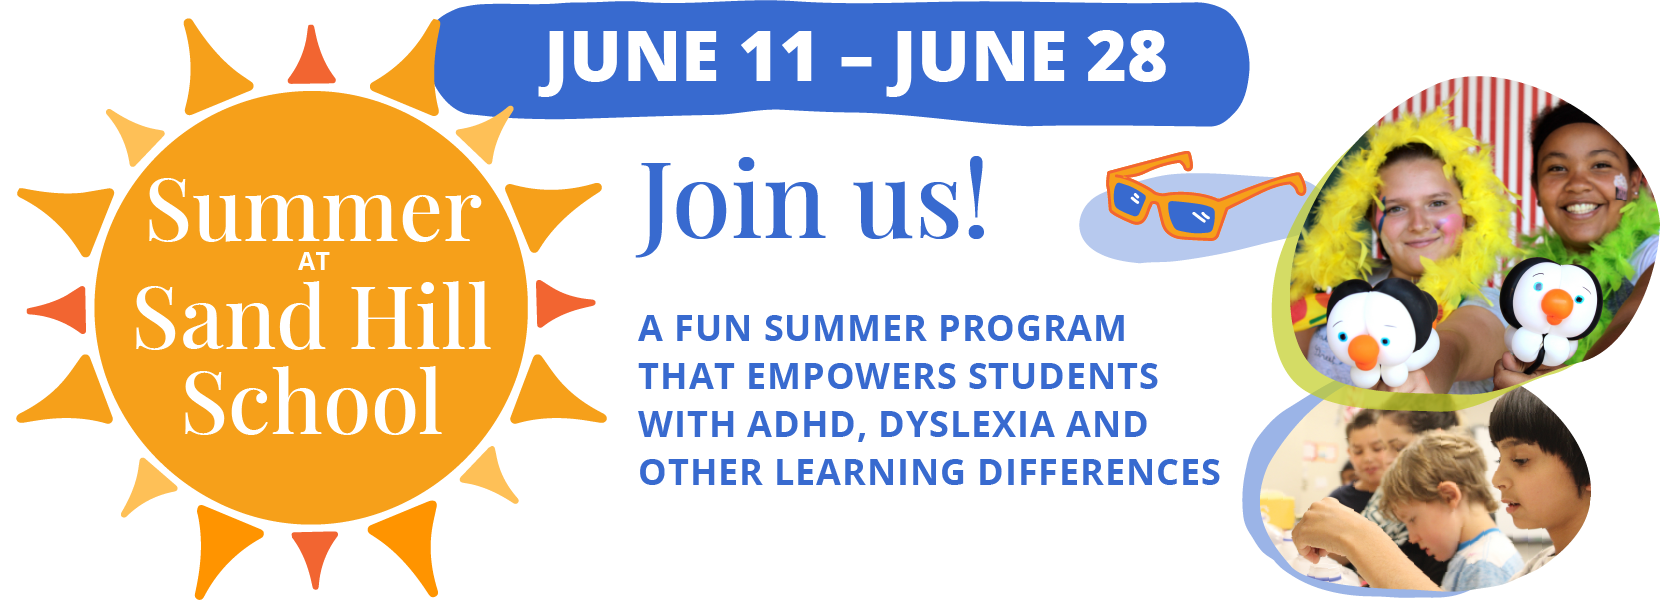 Summer at Sand Hill School. Join us! A fun summer program that empowers students with ADHD, dyslexia and other learning differences.